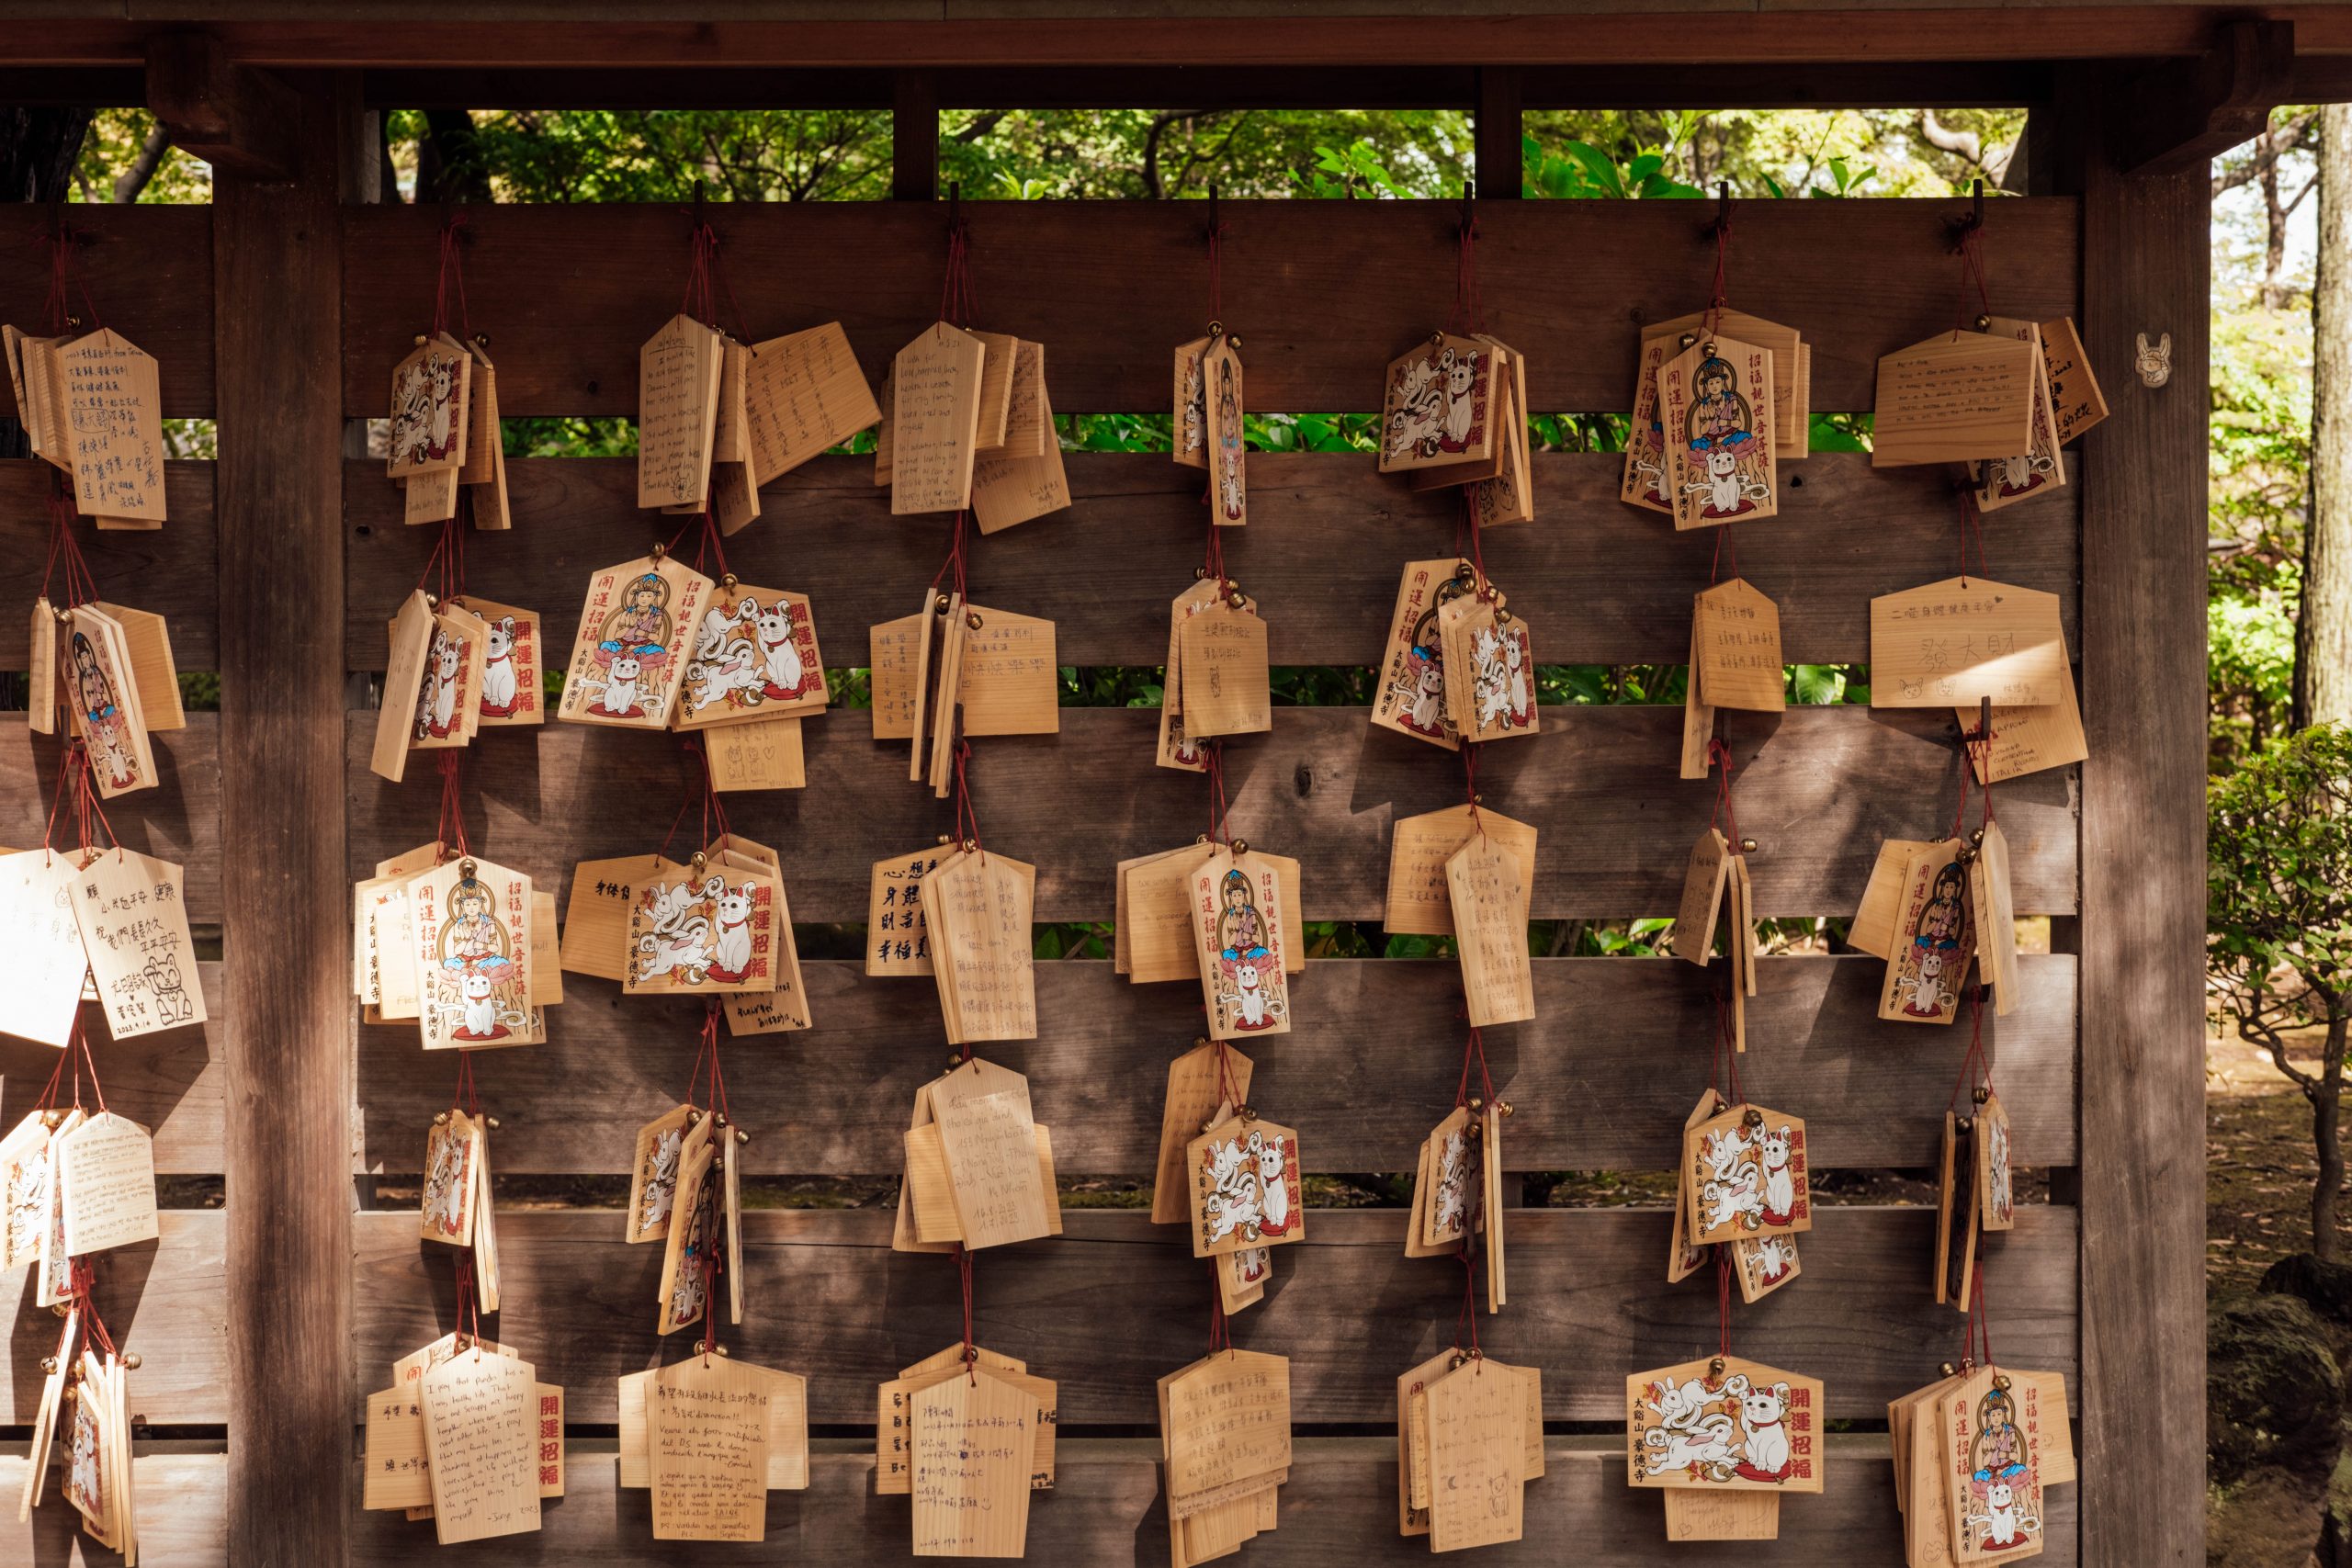 Ema plaques at the Gotokuji temple